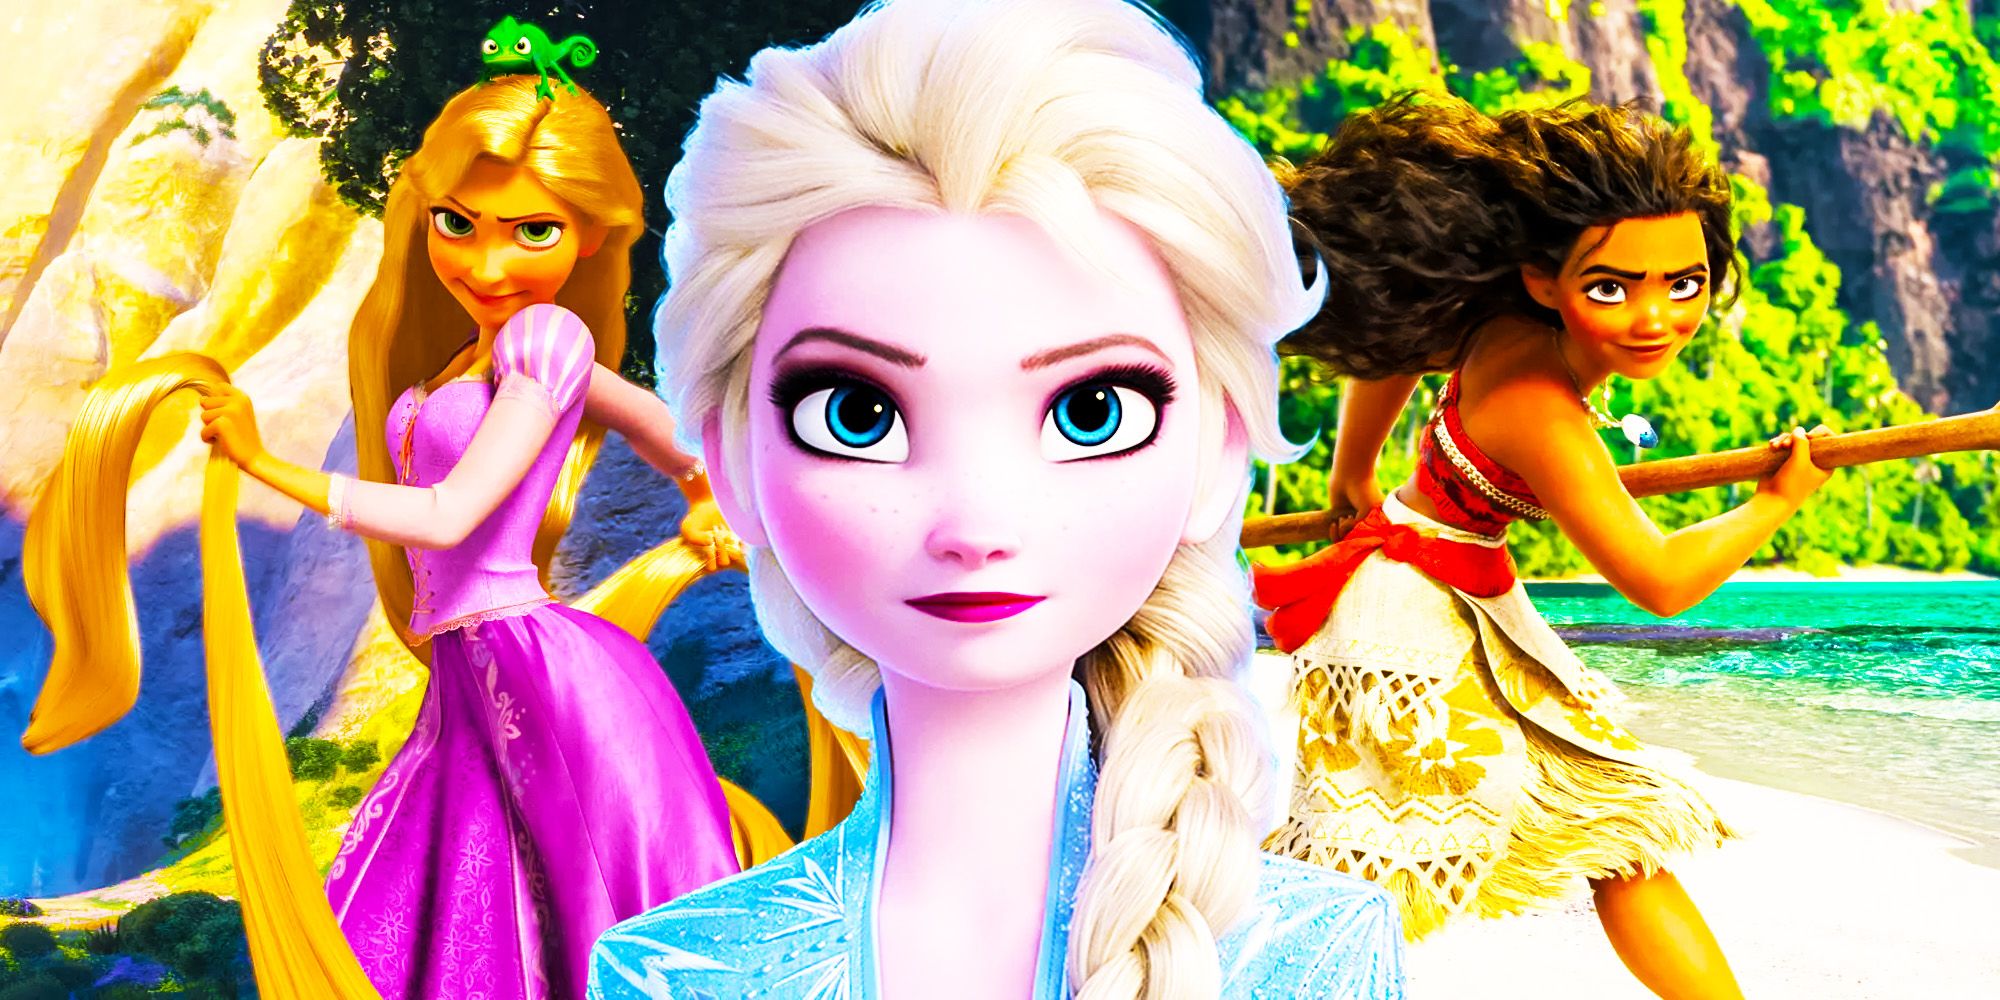 Is Elsa The Strongest Disney Princess? Who Could Beat Her?